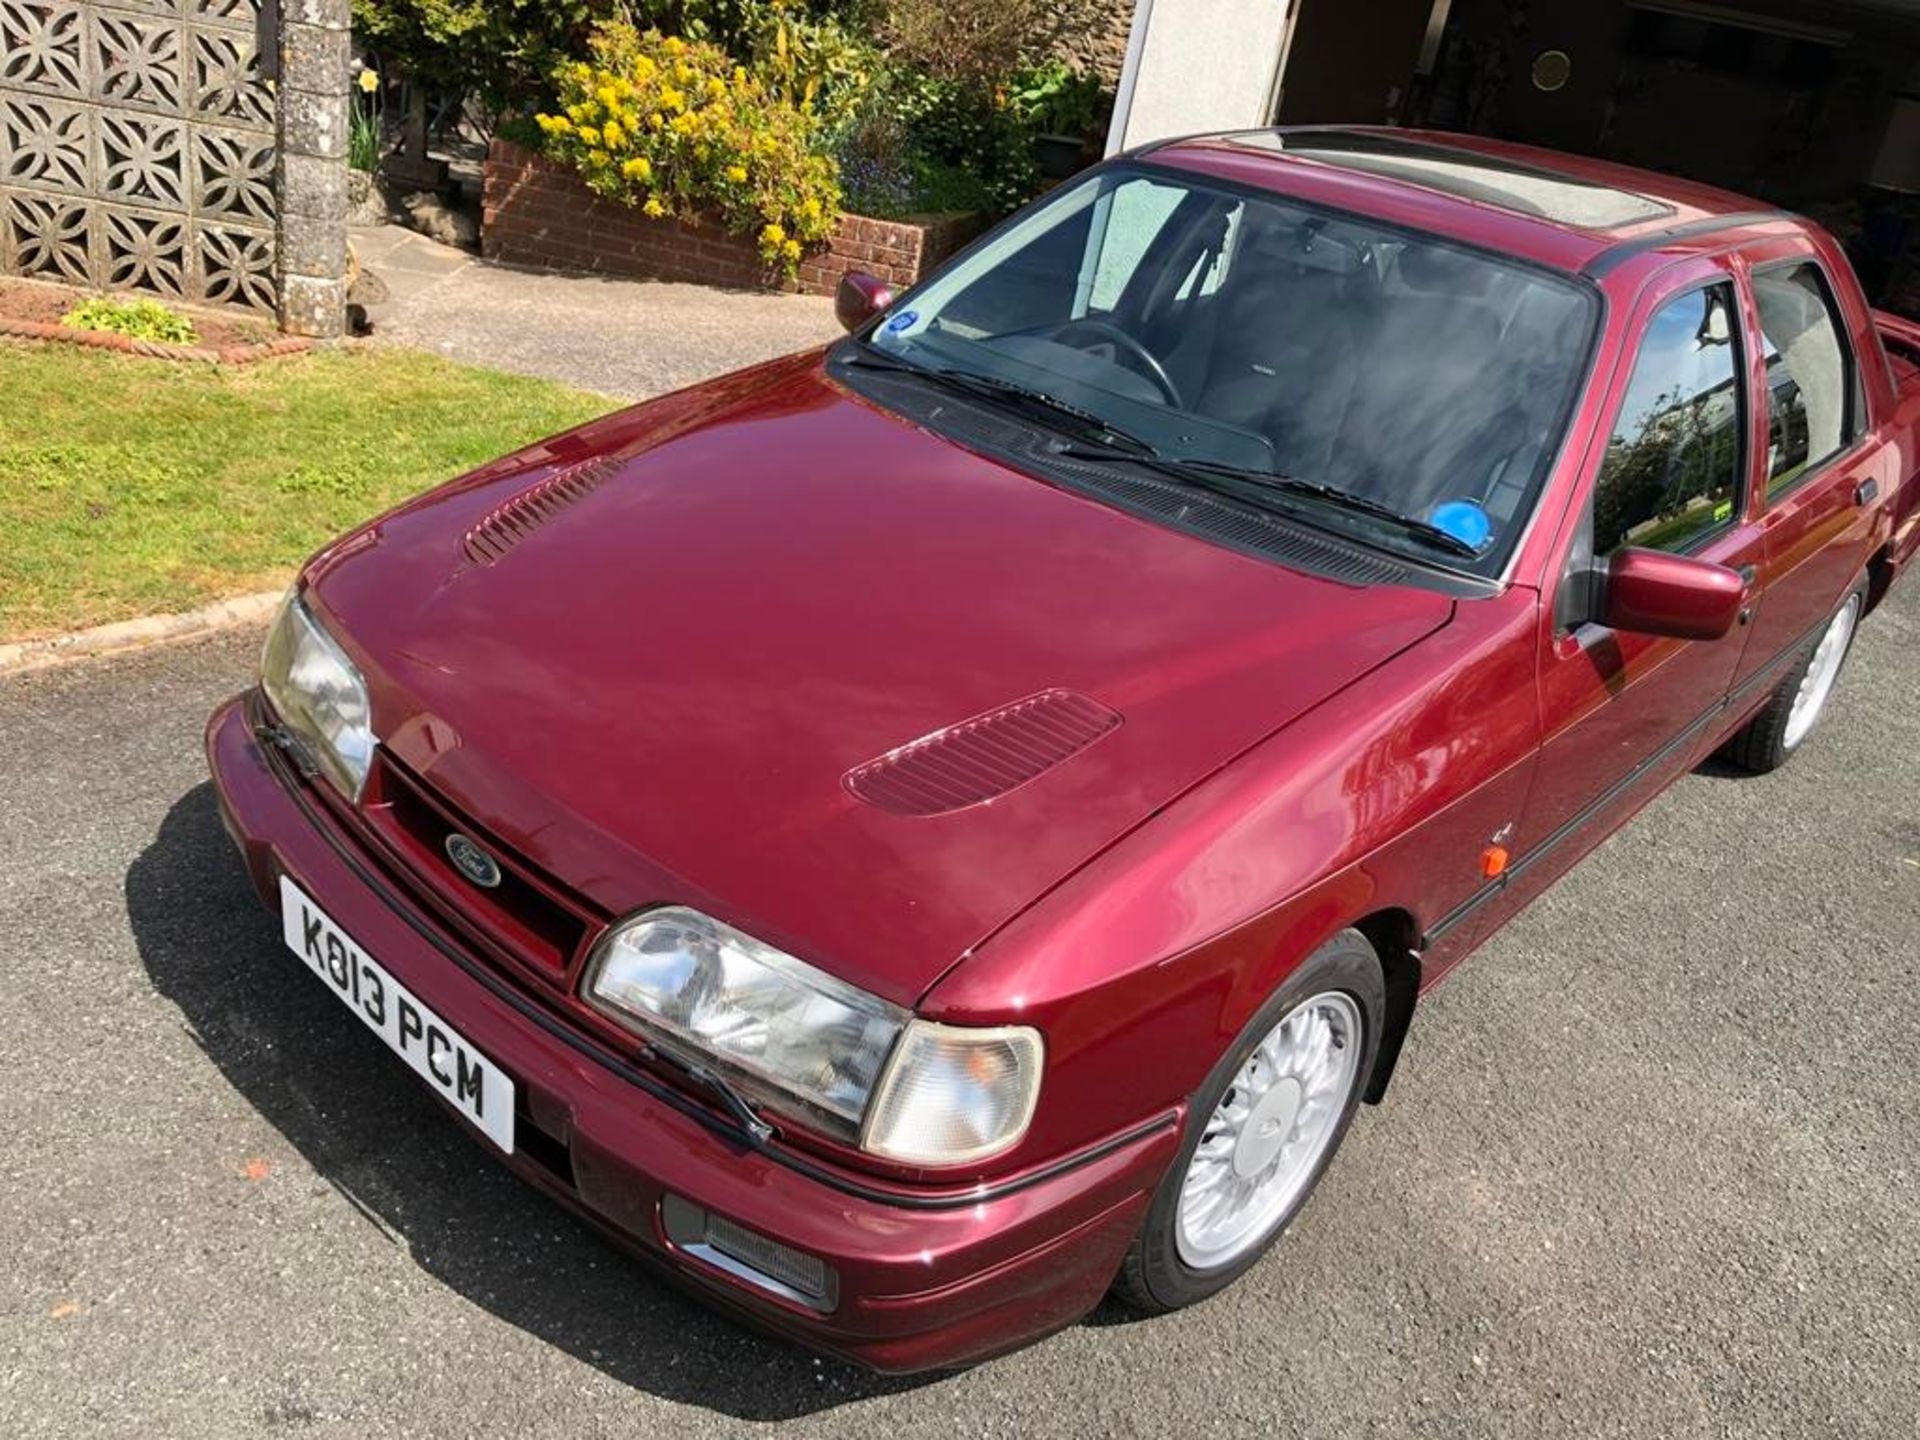 1992 Ford Sierra Sapphire Cosworth 4x4 Registration number K813 PCM Nouveau red, Recaro seats Bought - Image 14 of 128